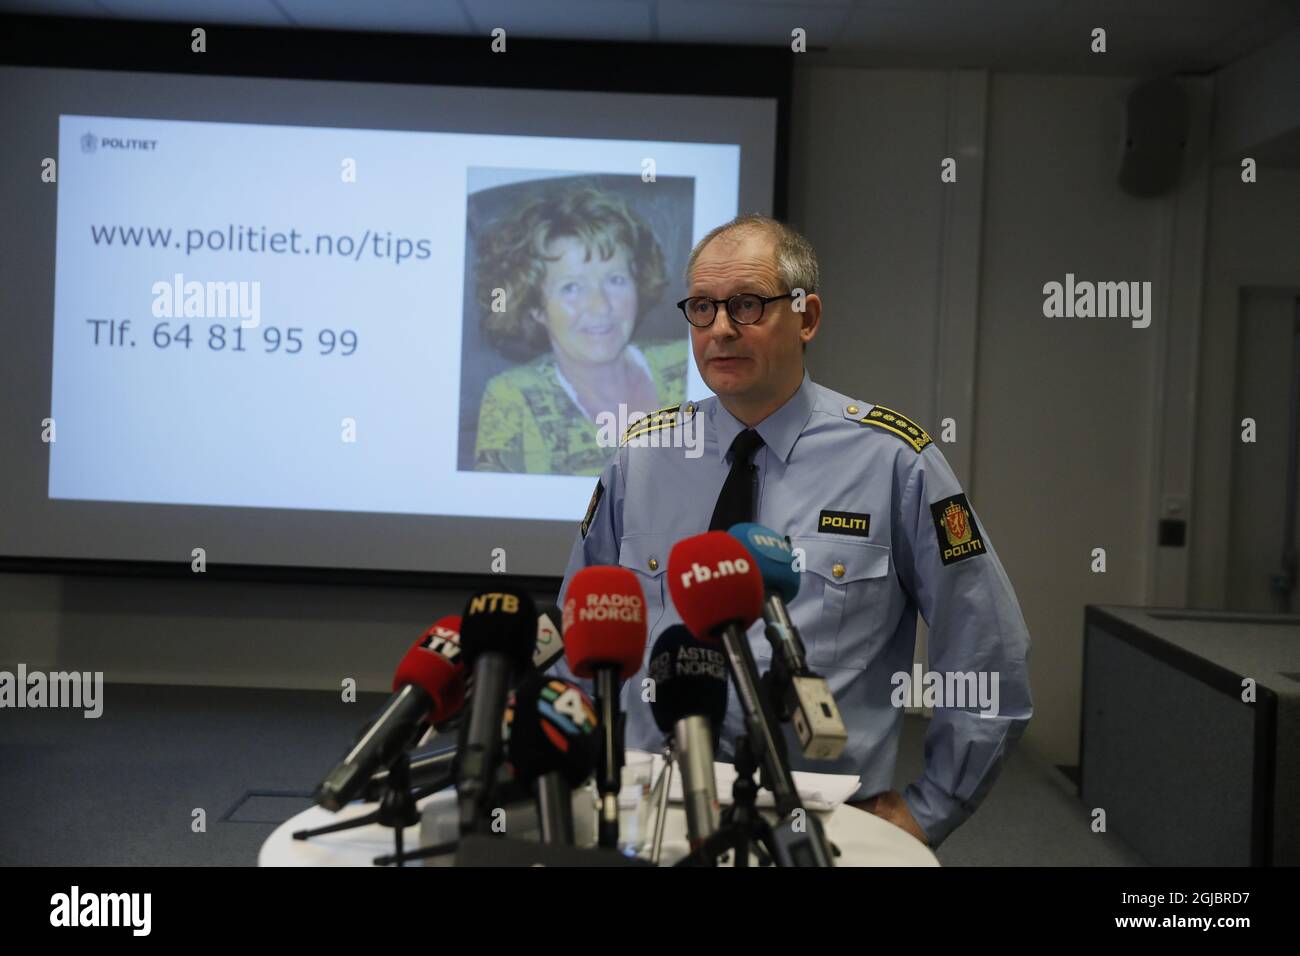 Anne-Elisabeth Falkevik Hagen, wife of Tom Hagen, one of Norway's richest businessmen, has been missing for ten week. Investigators search the property. Tommy Broske chairs a conference Stock Photo